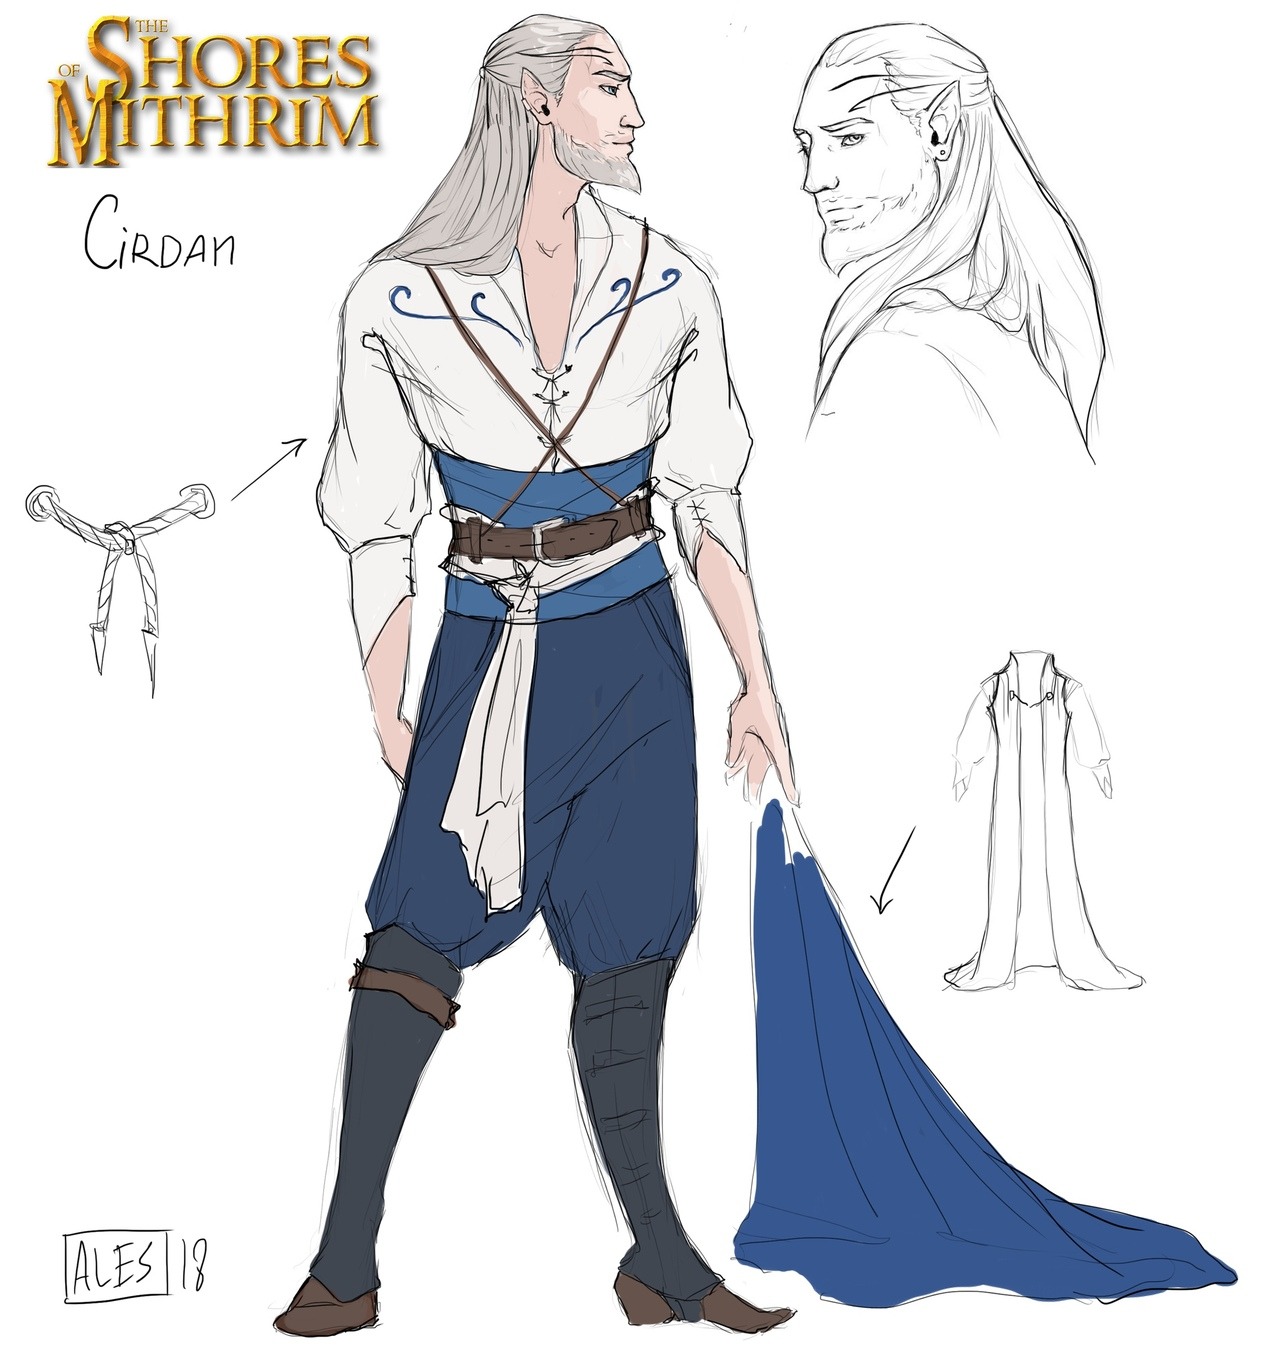 Cirdan. Concept for “Shores of Mithrim” from “Journey to the Middle-Earth” cosplay project.
More art: ALES